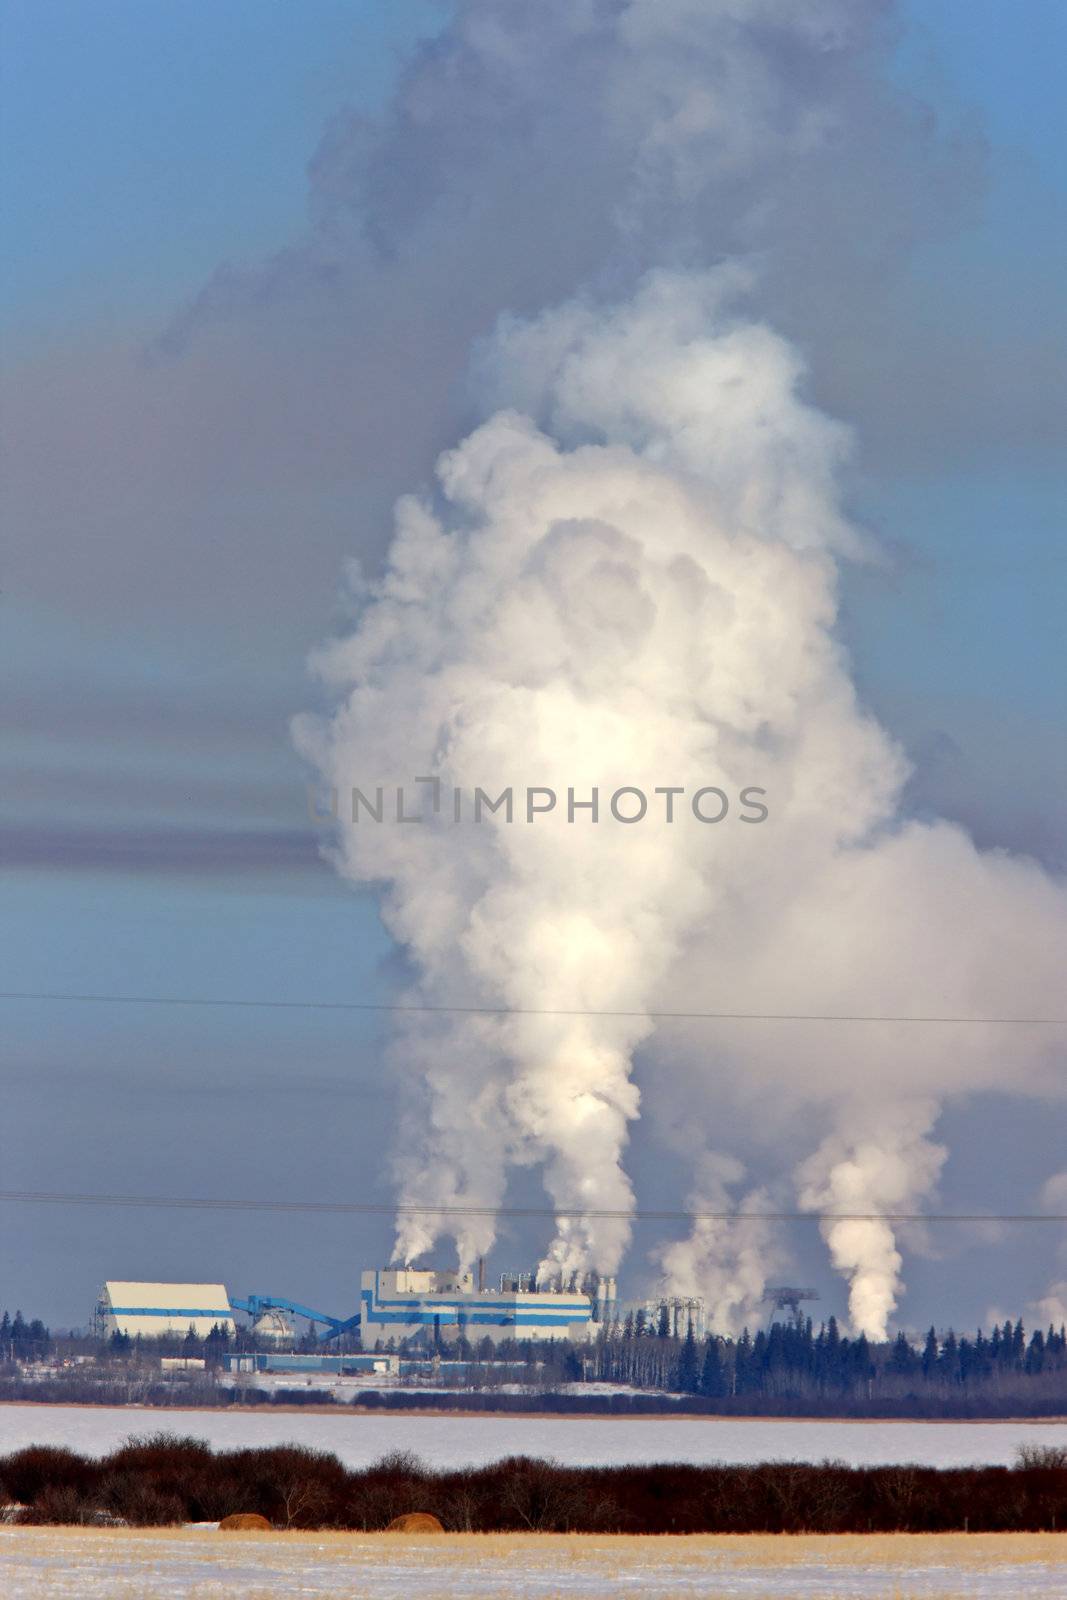 Power Lines and Pulp Mill Pollution